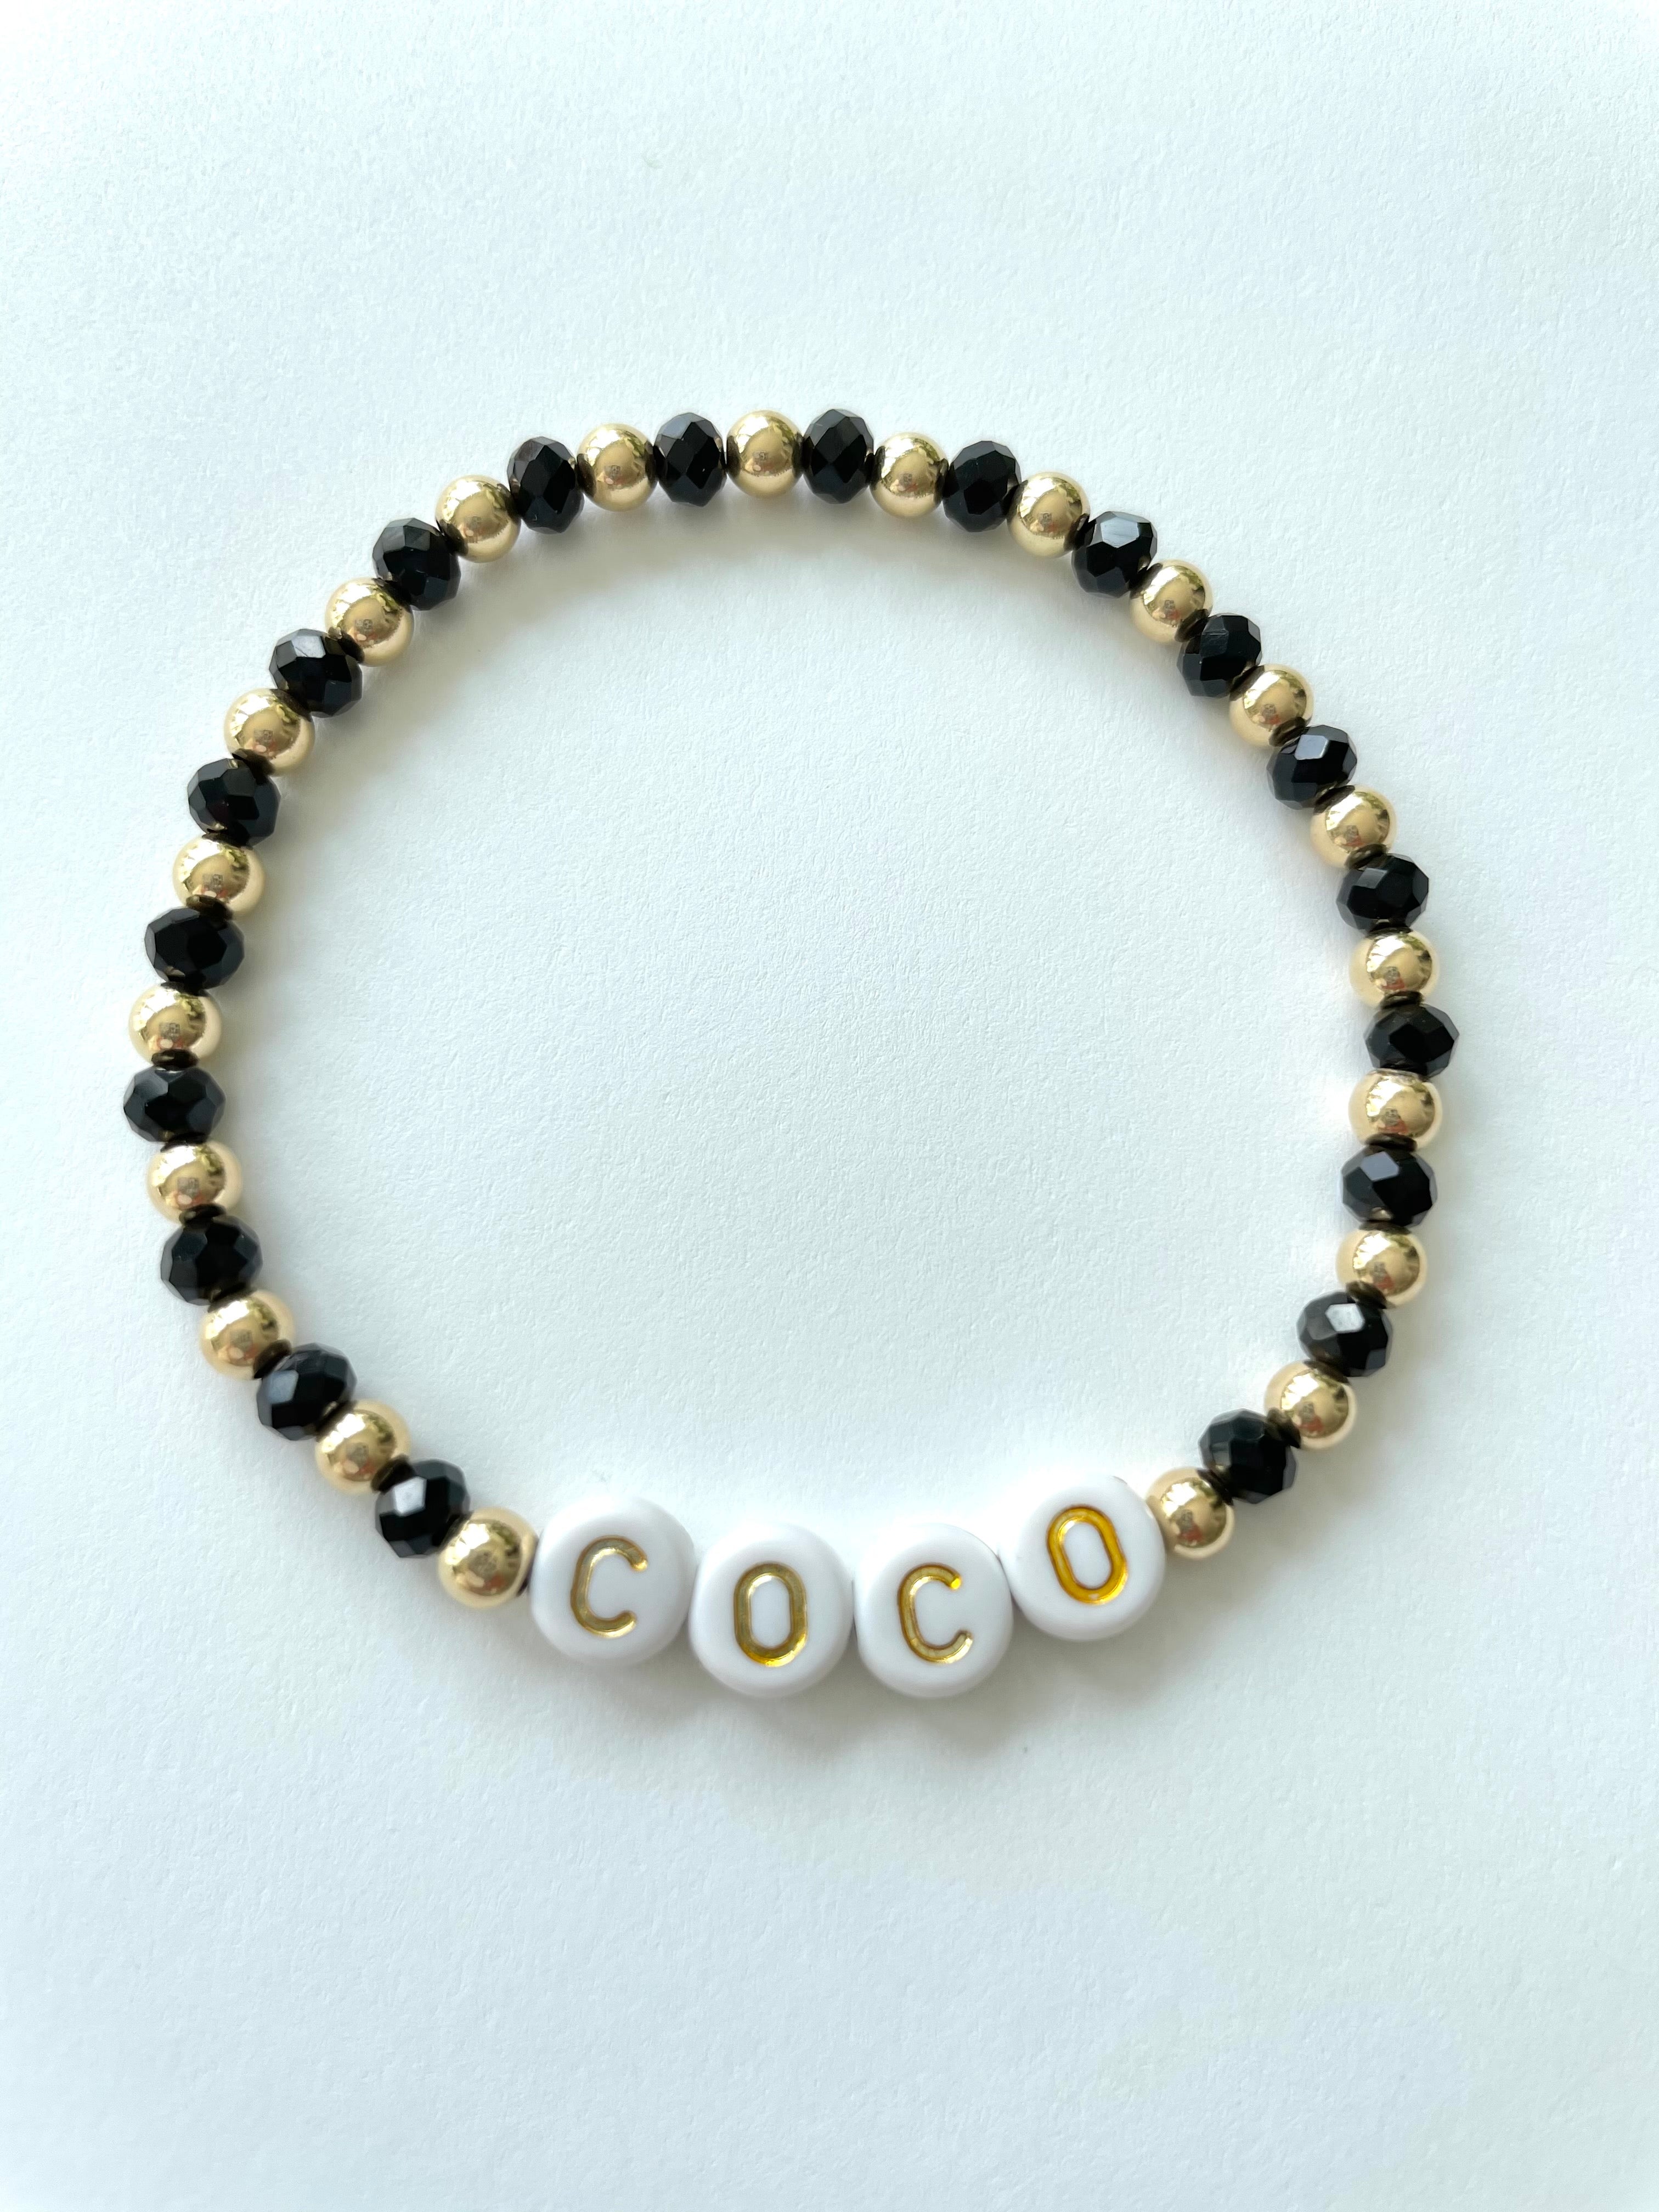 The COCO Name or Initial Bracelet